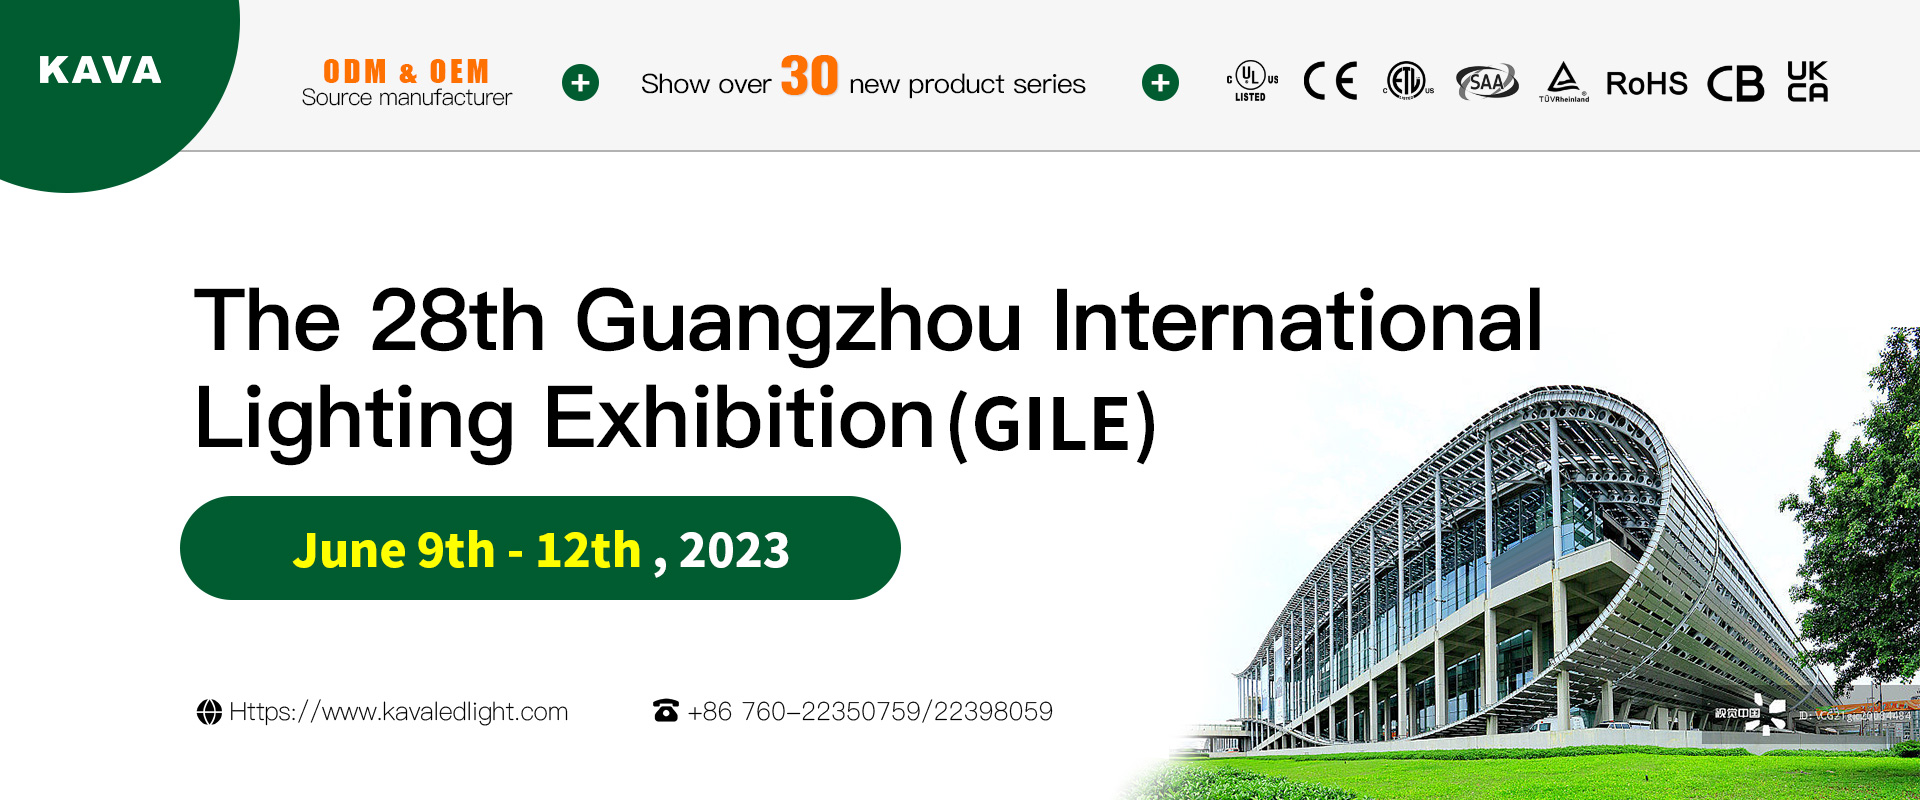 KAVA to showcase 40+ new products at 2023 Guangzhou International Lighting Exhibition